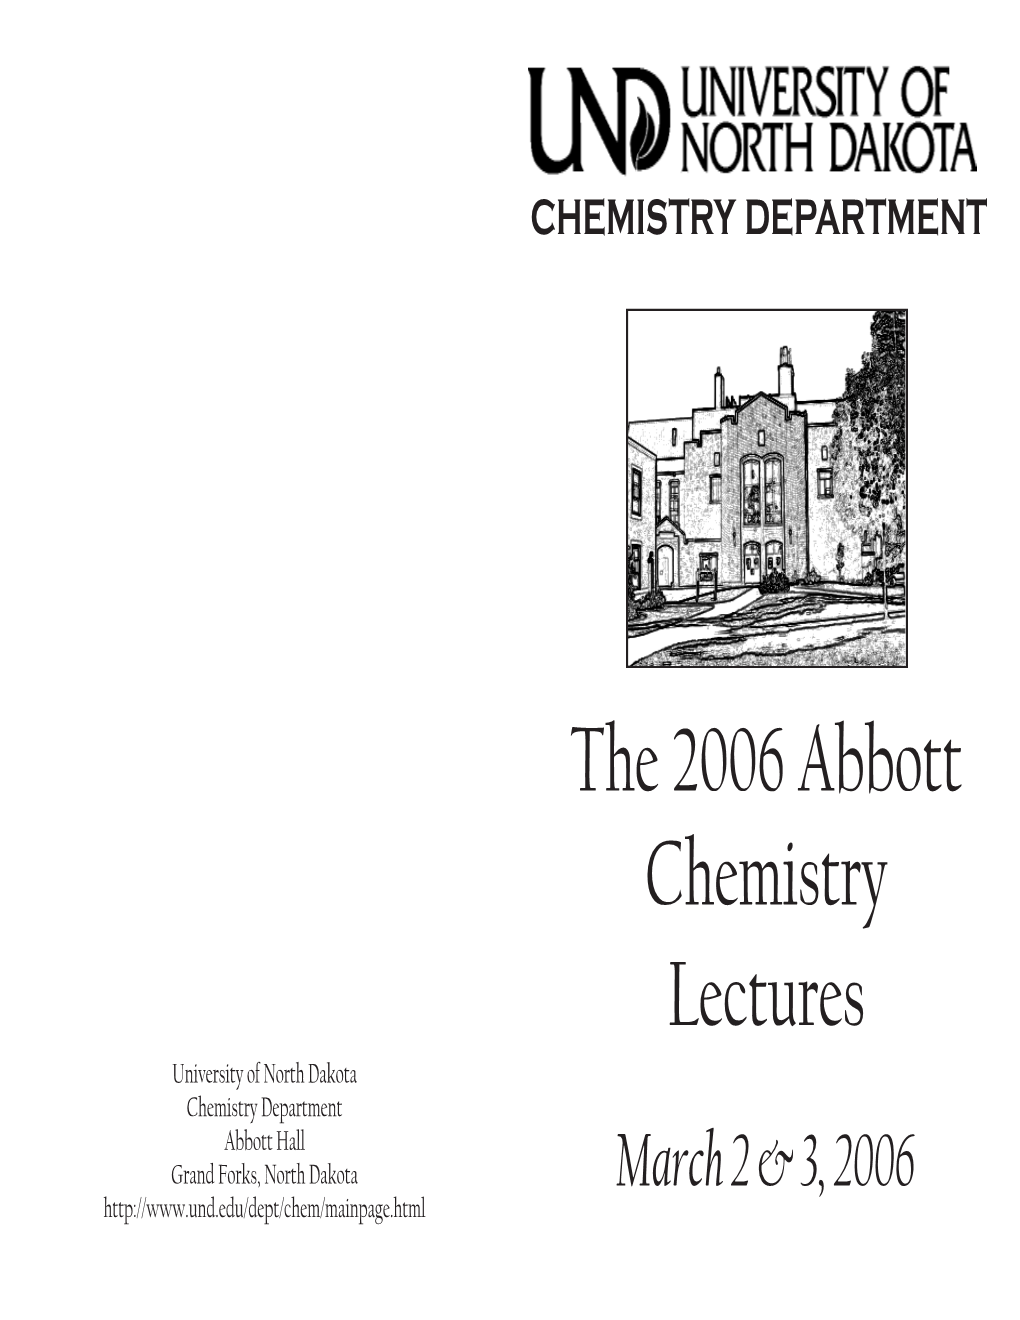 The 2006 Abbott Chemistry Lectures